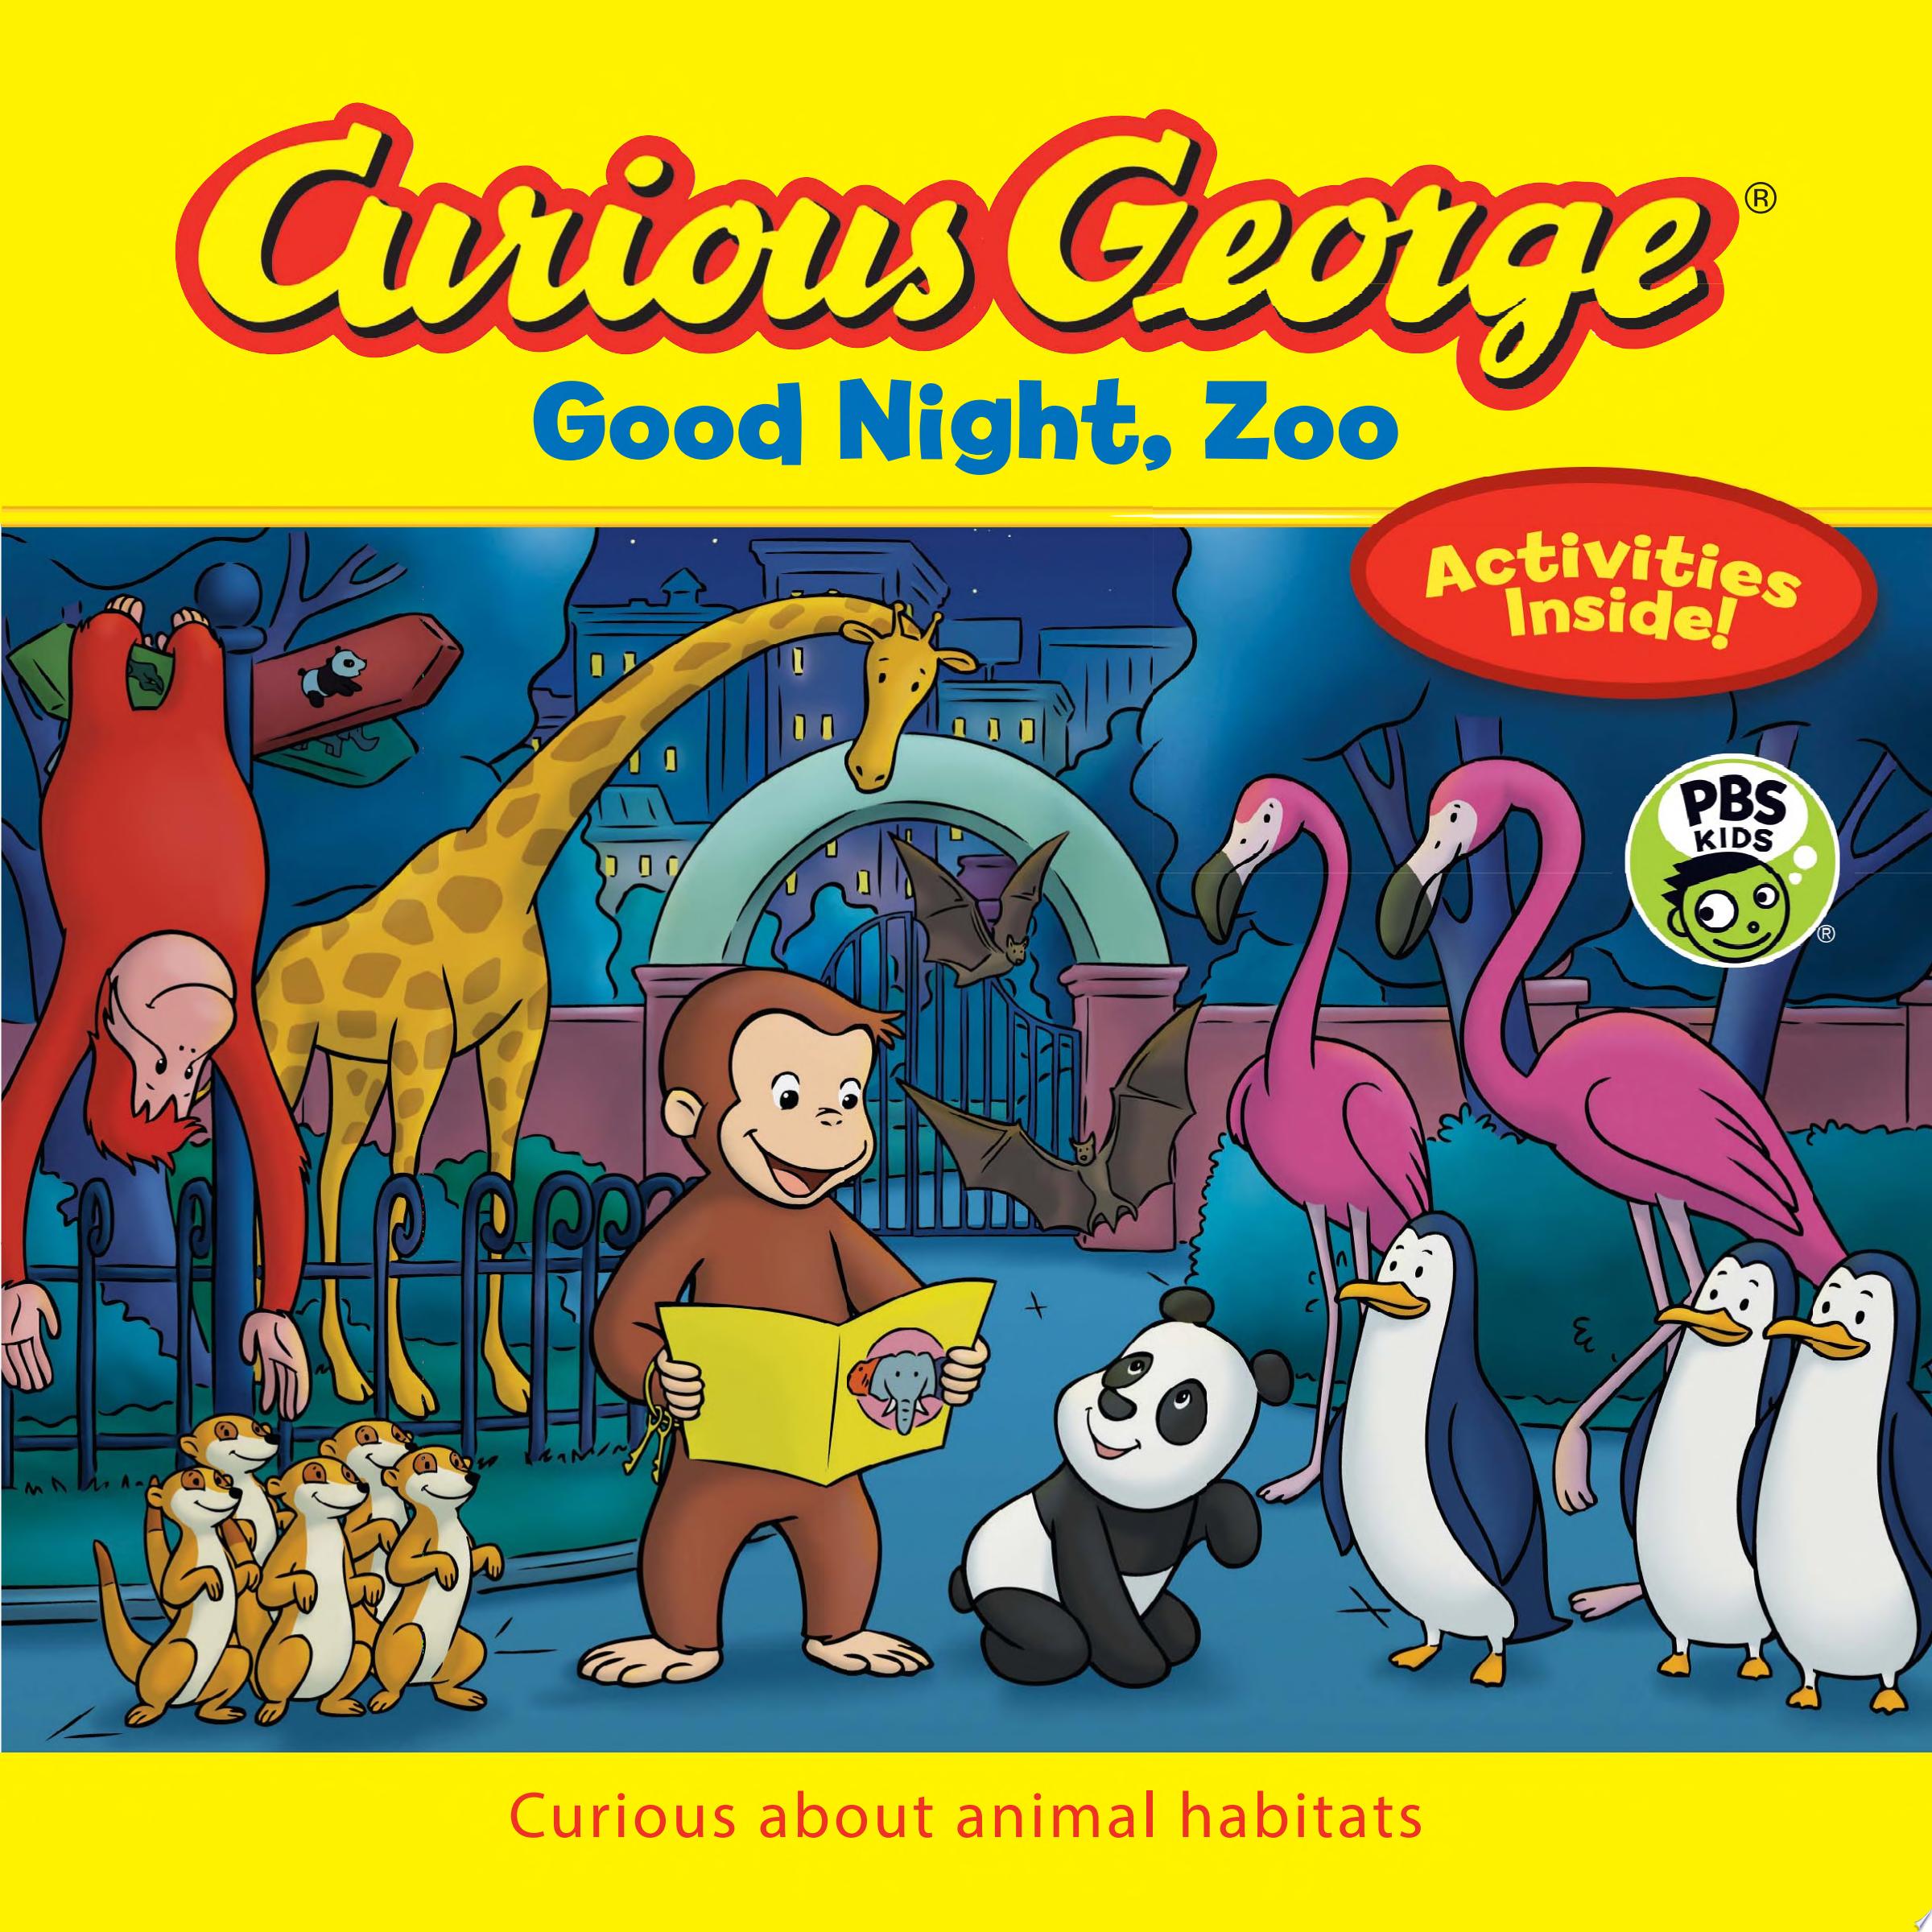 Image for "Curious George Good Night, Zoo